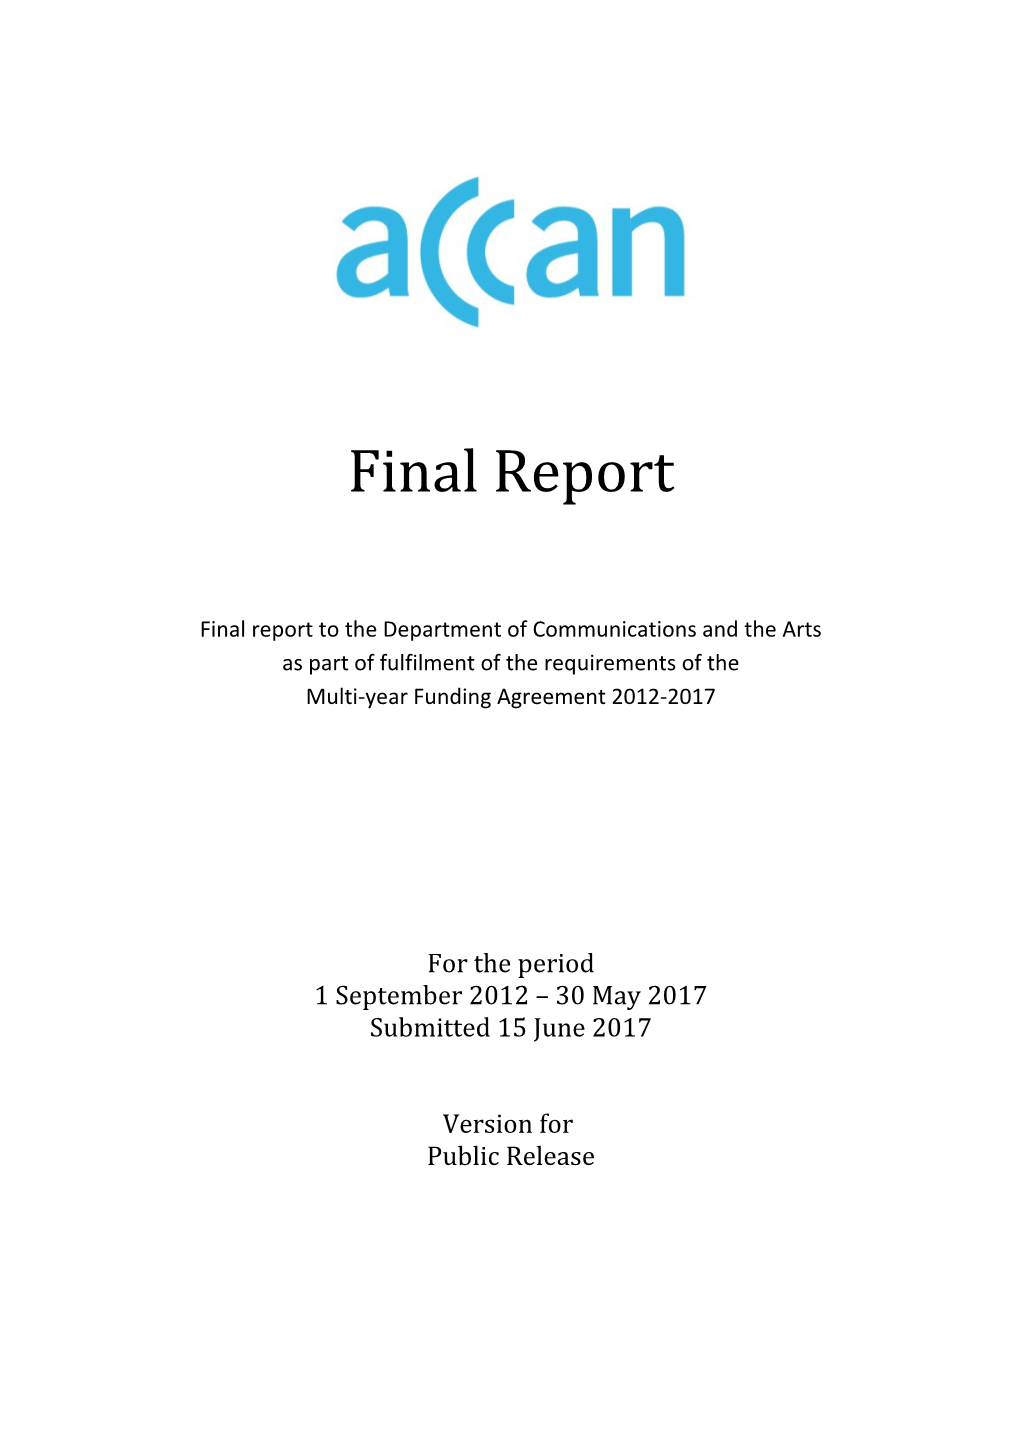 Final Report to the Department of Communications and the Arts As Part of Fulfilment Of